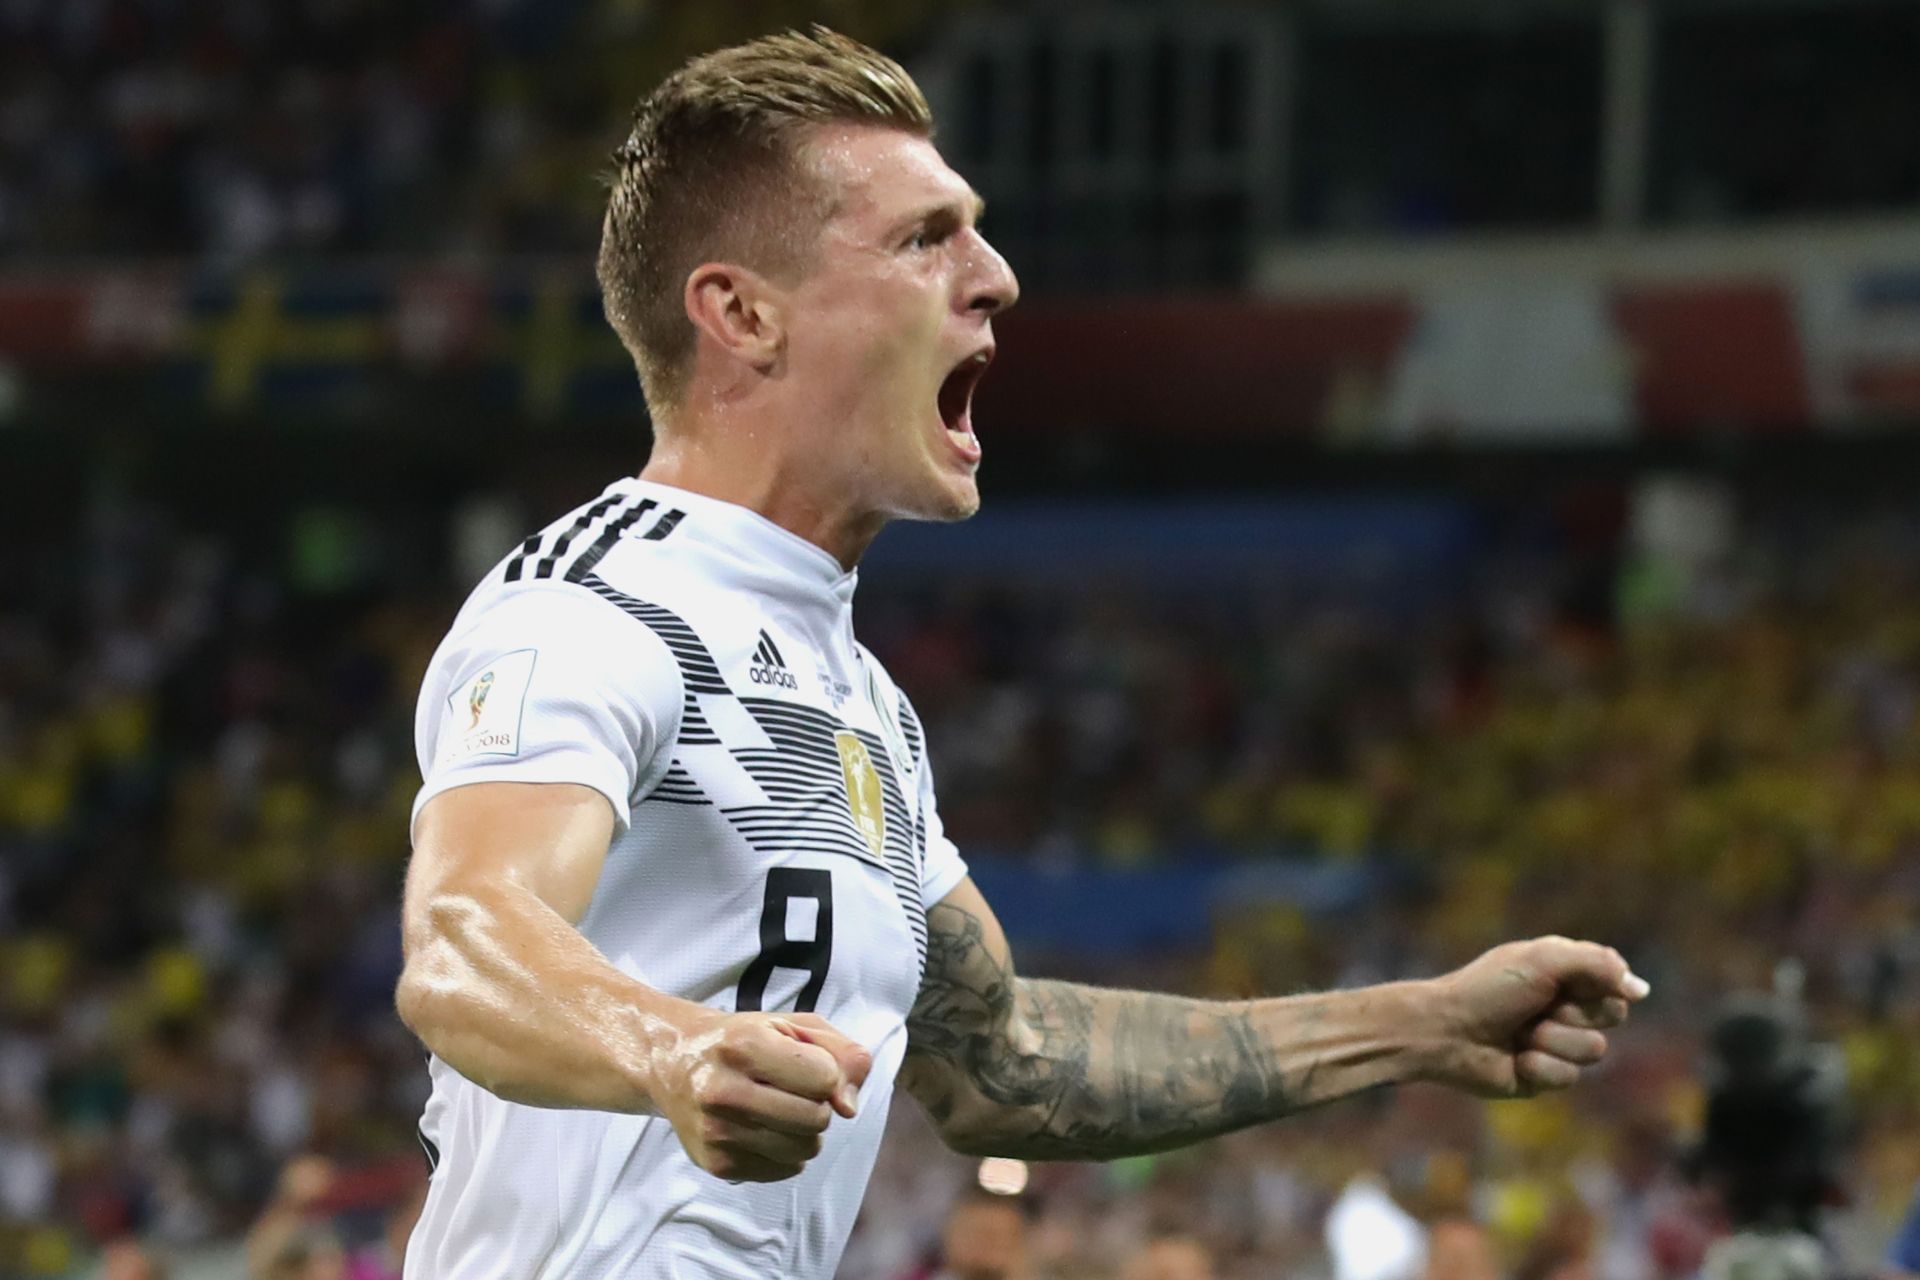 Toni Kroos could be back in Germany colors.